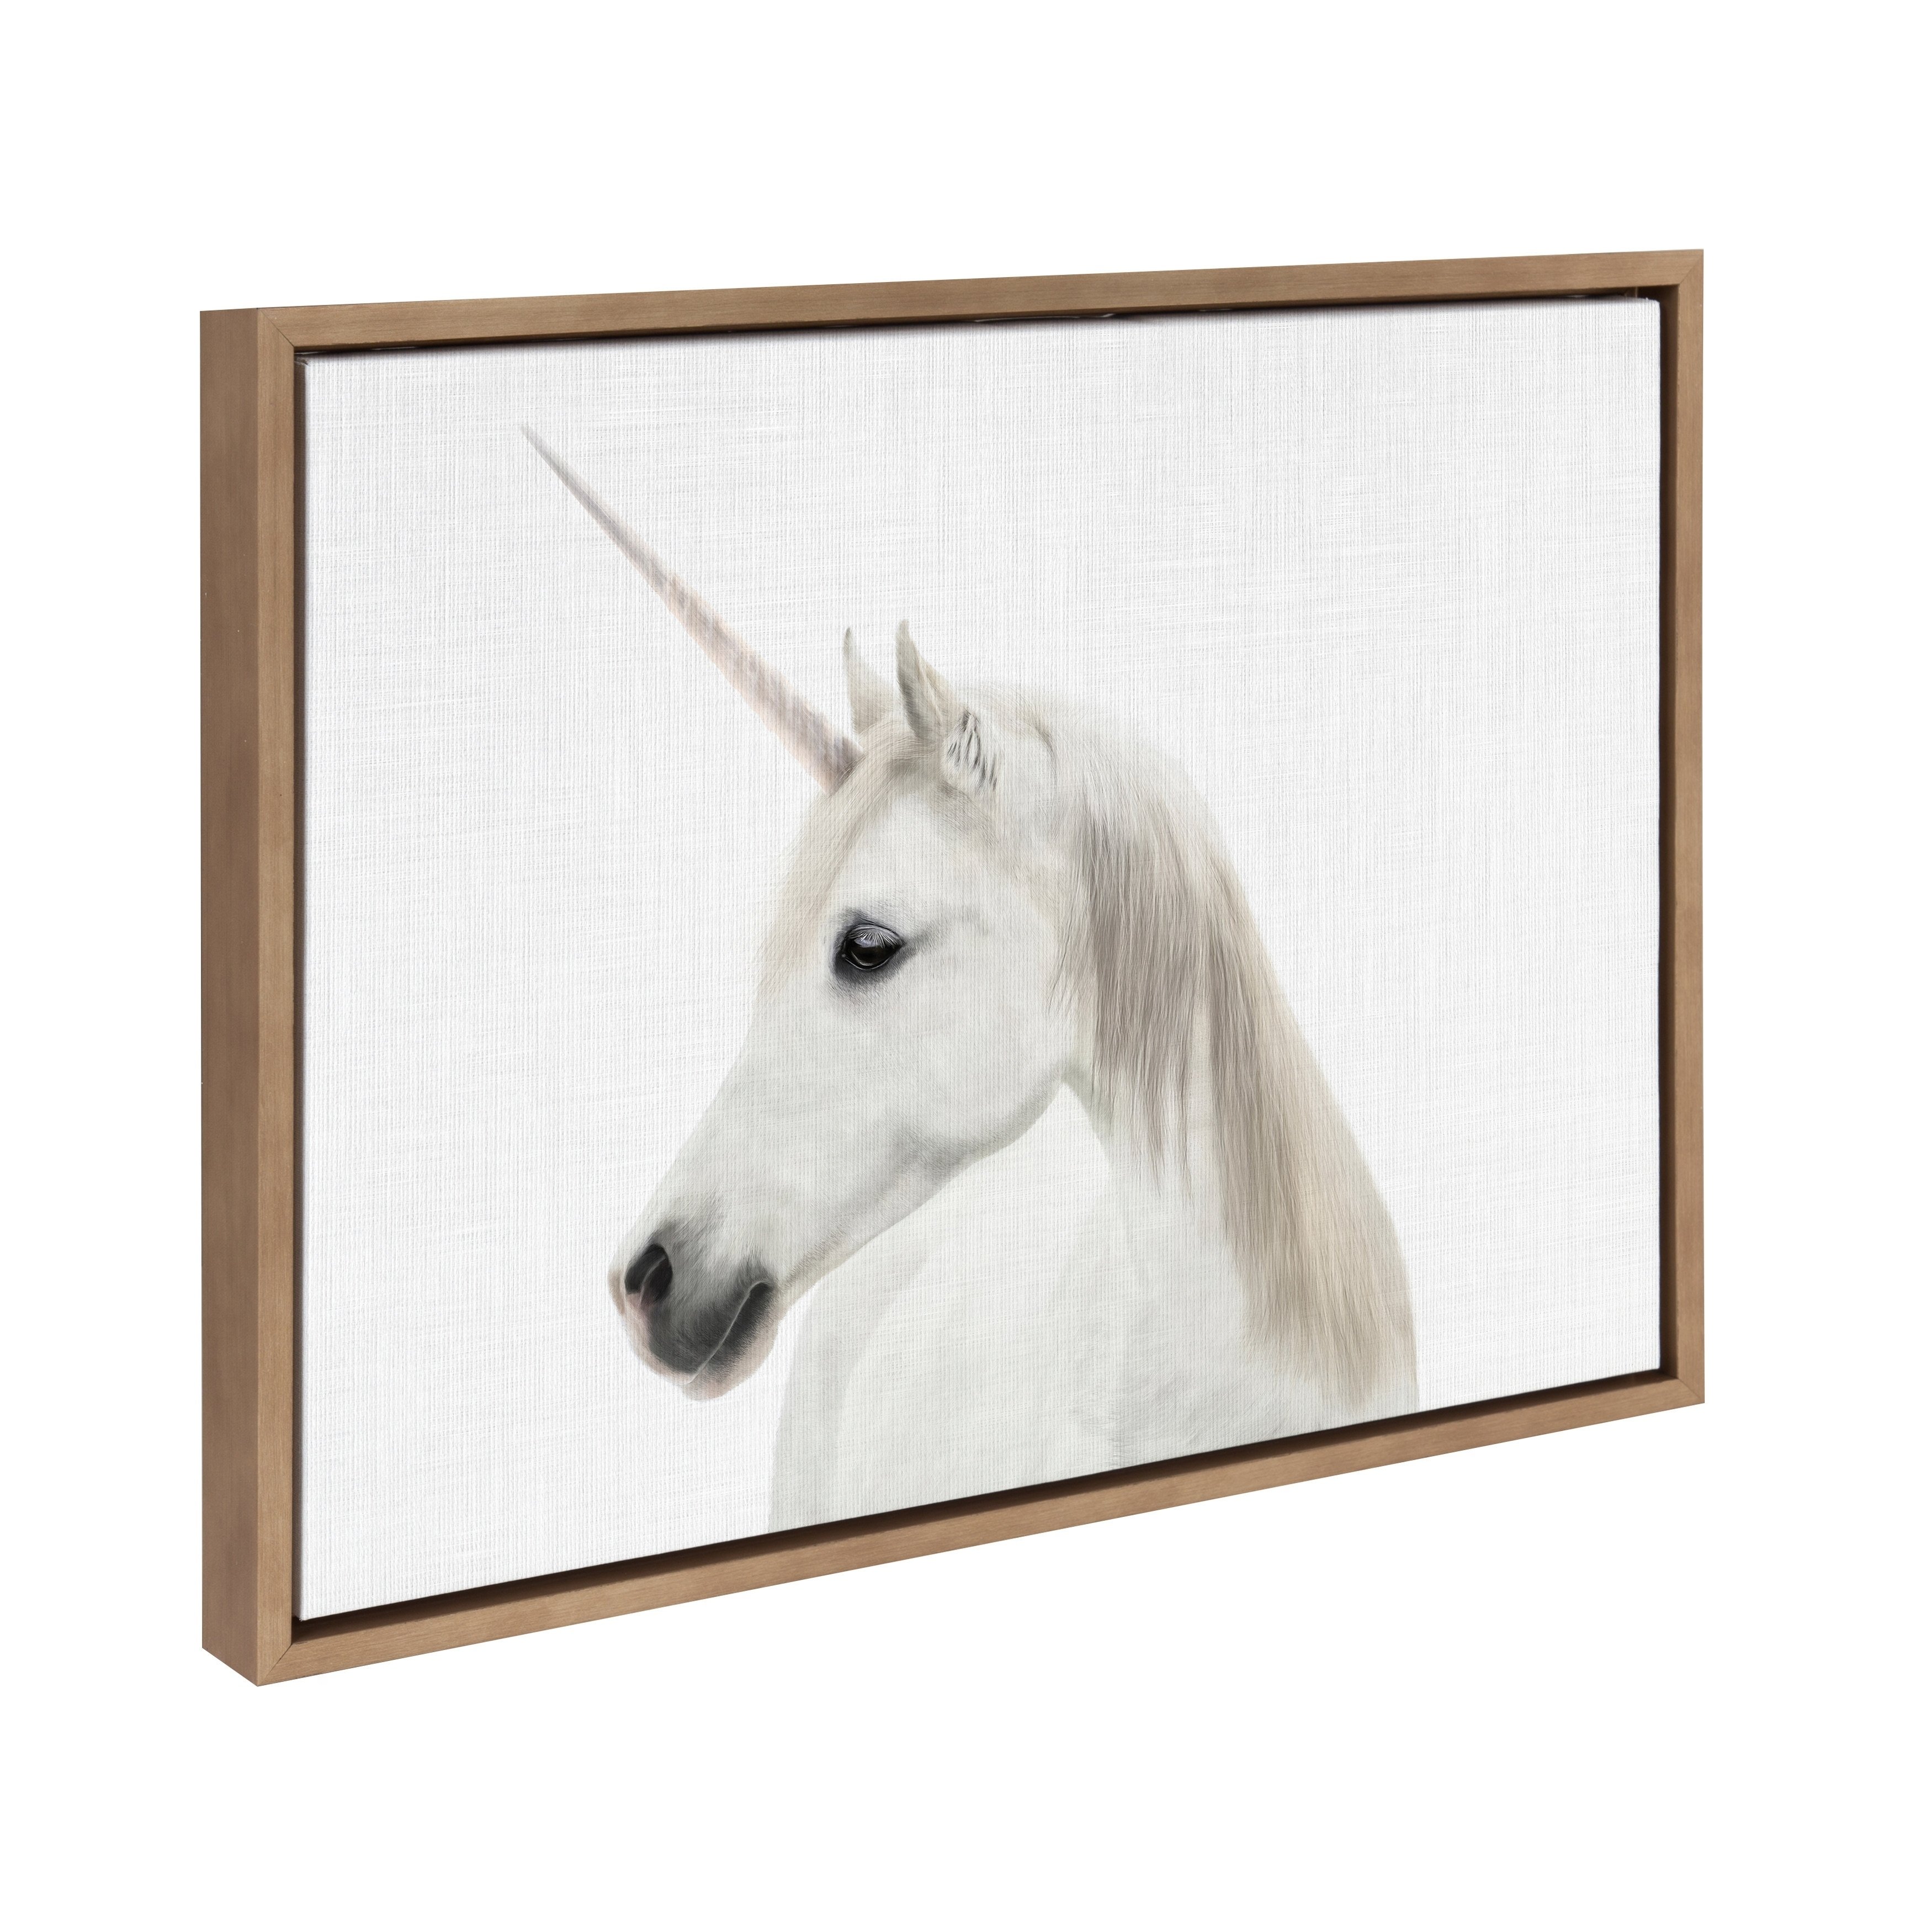 kate and laurel sylvie unicorn framed canvas simon tai gold accent table free shipping today hardwood threshold stump college dorm room decor nautical hanging lamps balcony chairs